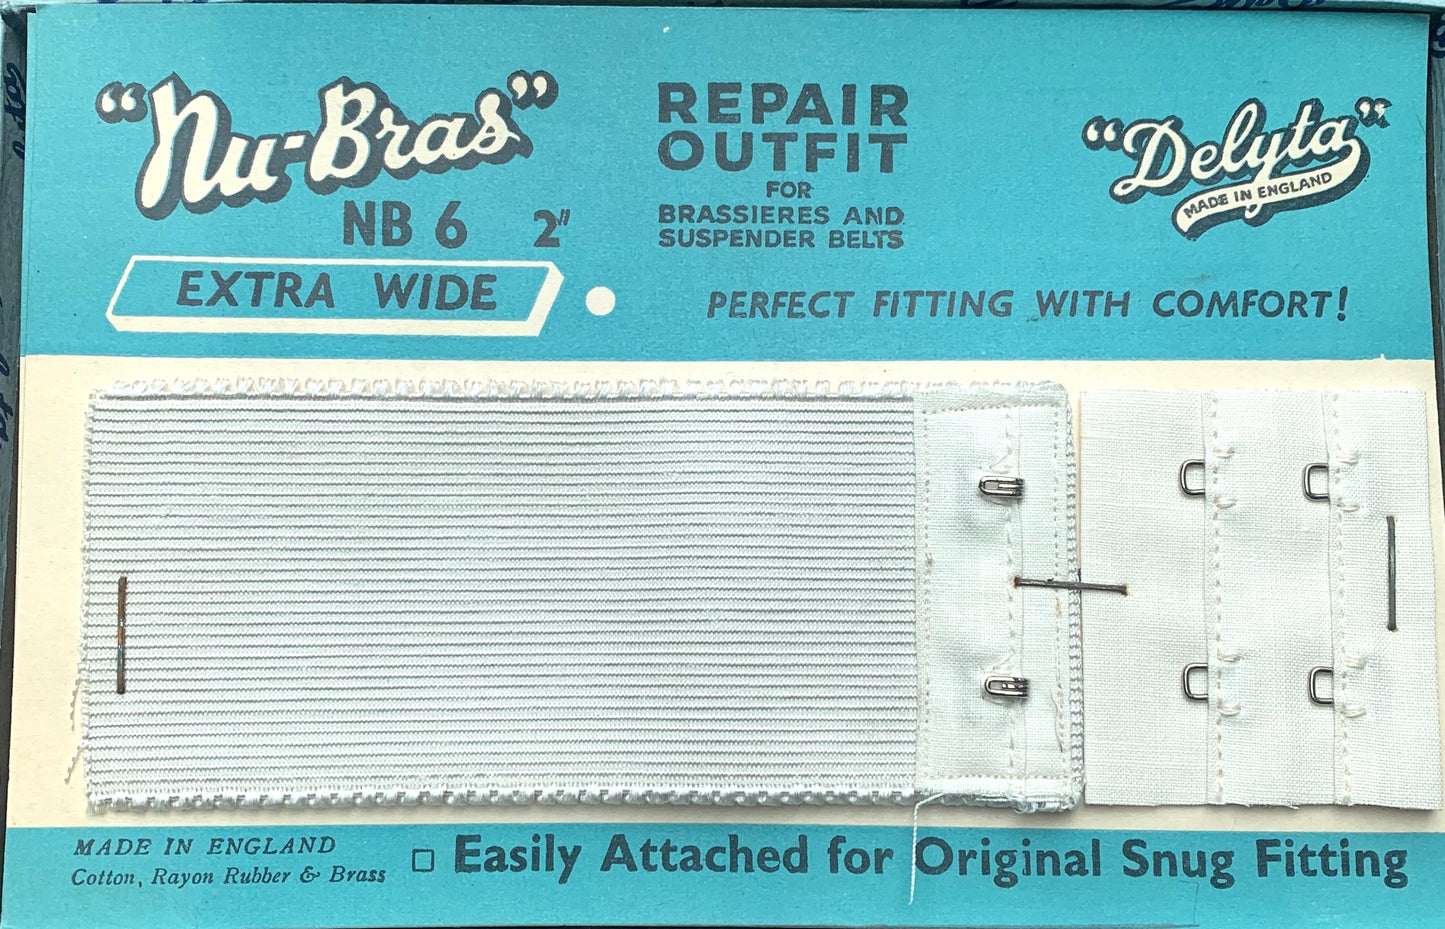 1940s "Nu-Bras"  Extra Wide 1.5" or 2" REPAIR OUTFIT for Brassieres and Suspender Belts